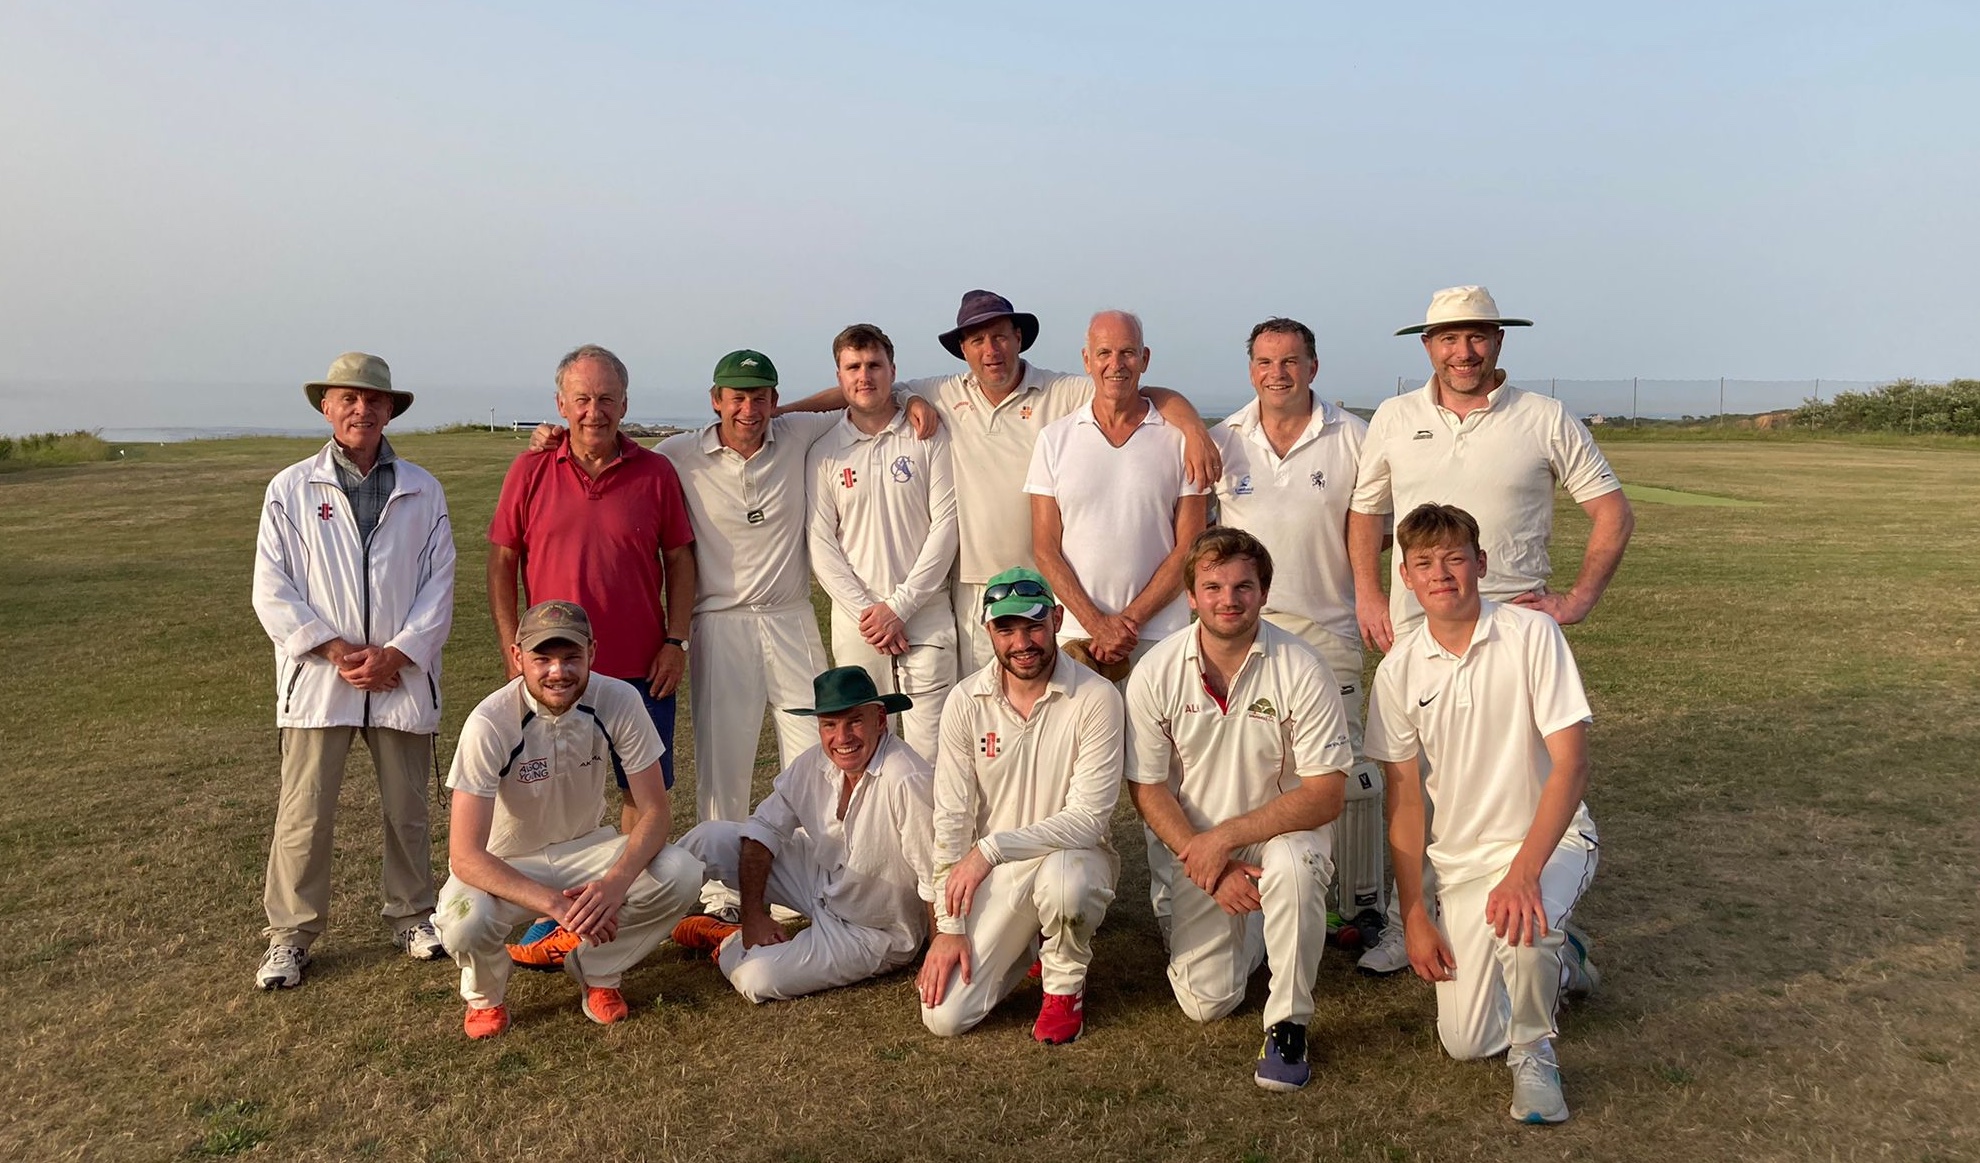 Winners of the Alderney Ashes, 2022